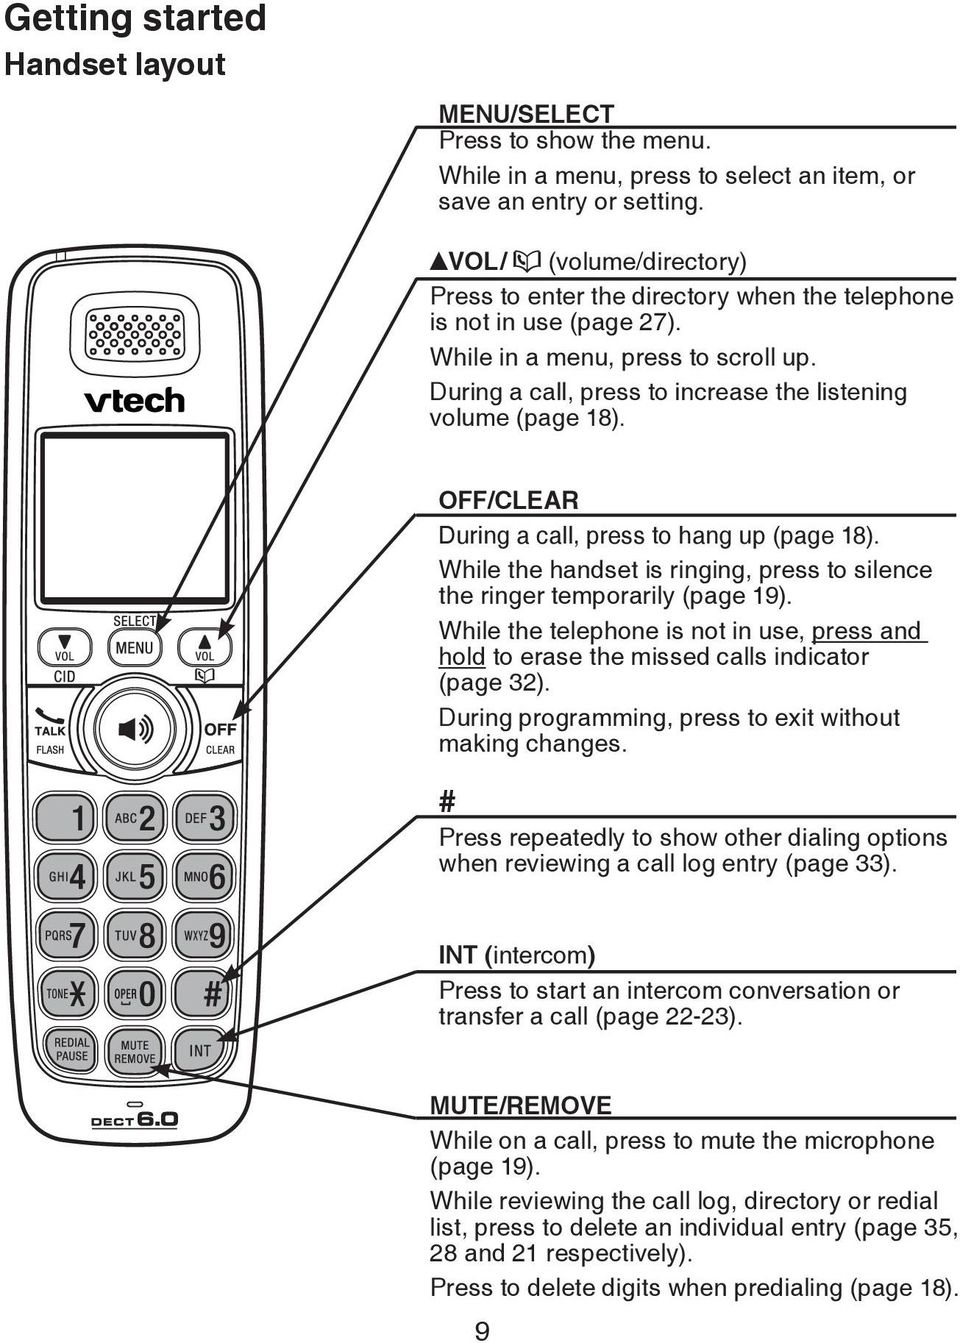 OFF/CLEAR During a call, press to hang up (page 18). While the handset is ringing, press to silence the ringer temporarily (page 19).